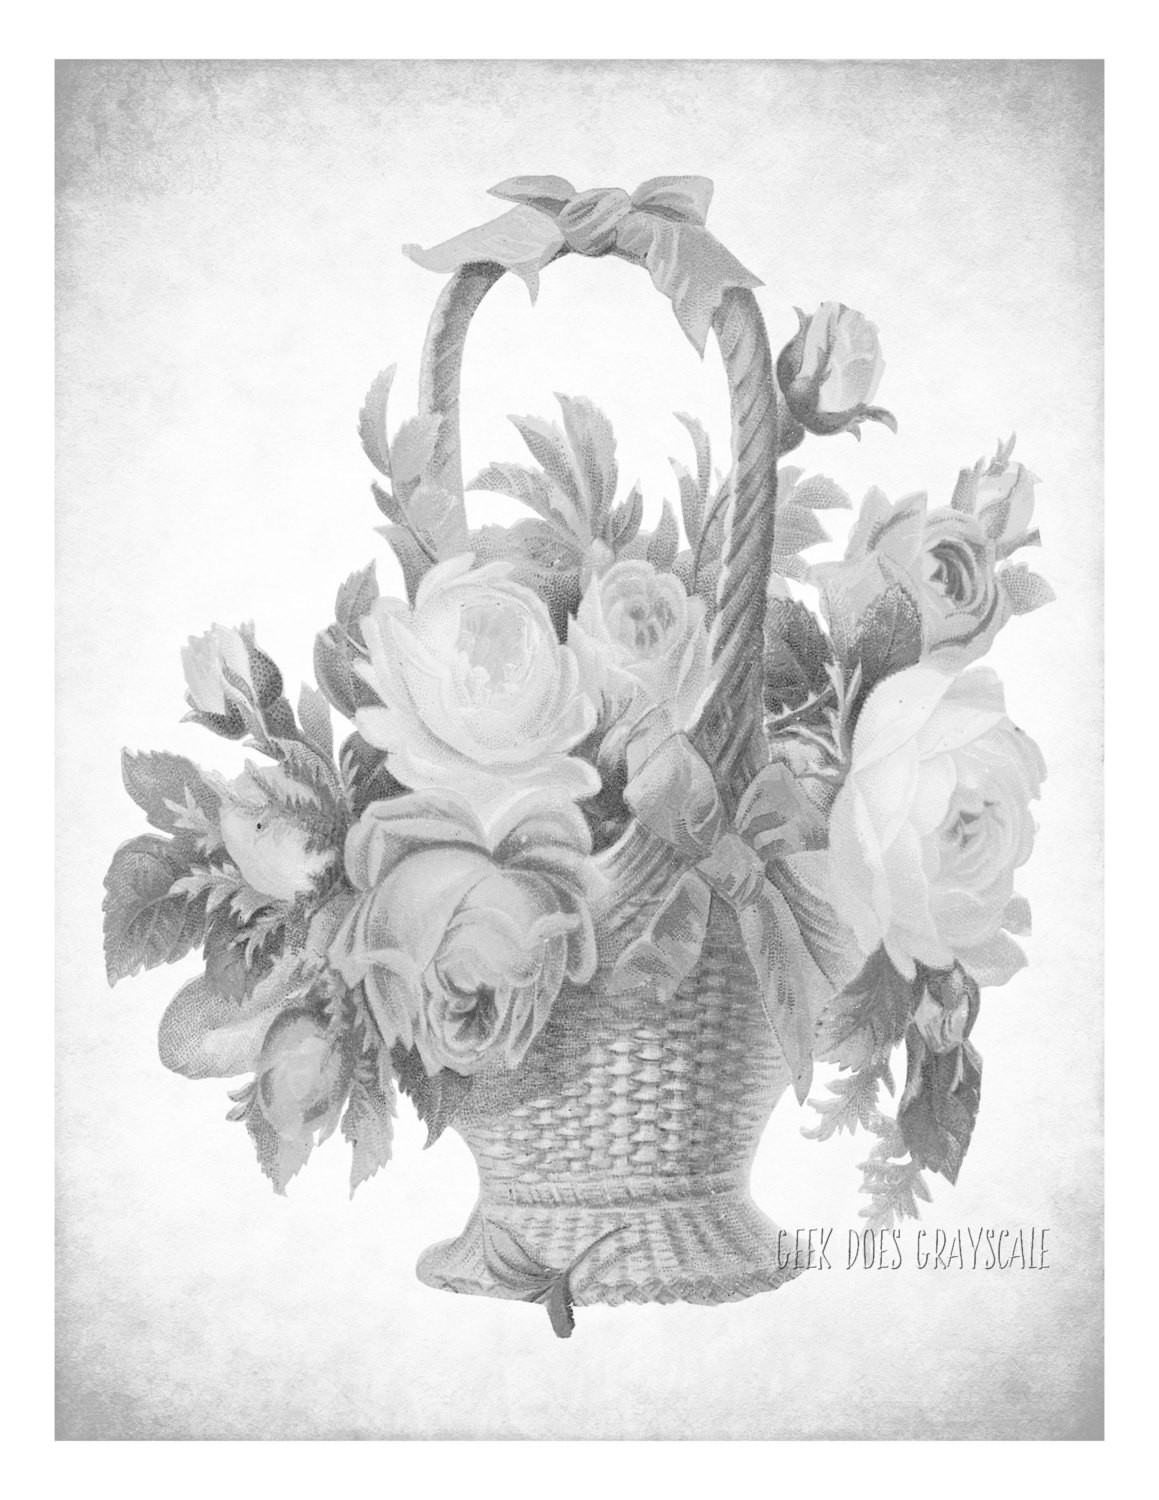 Grayscale Coloring Pages For Adults
 Flower Basket grayscale coloring page Adult coloring